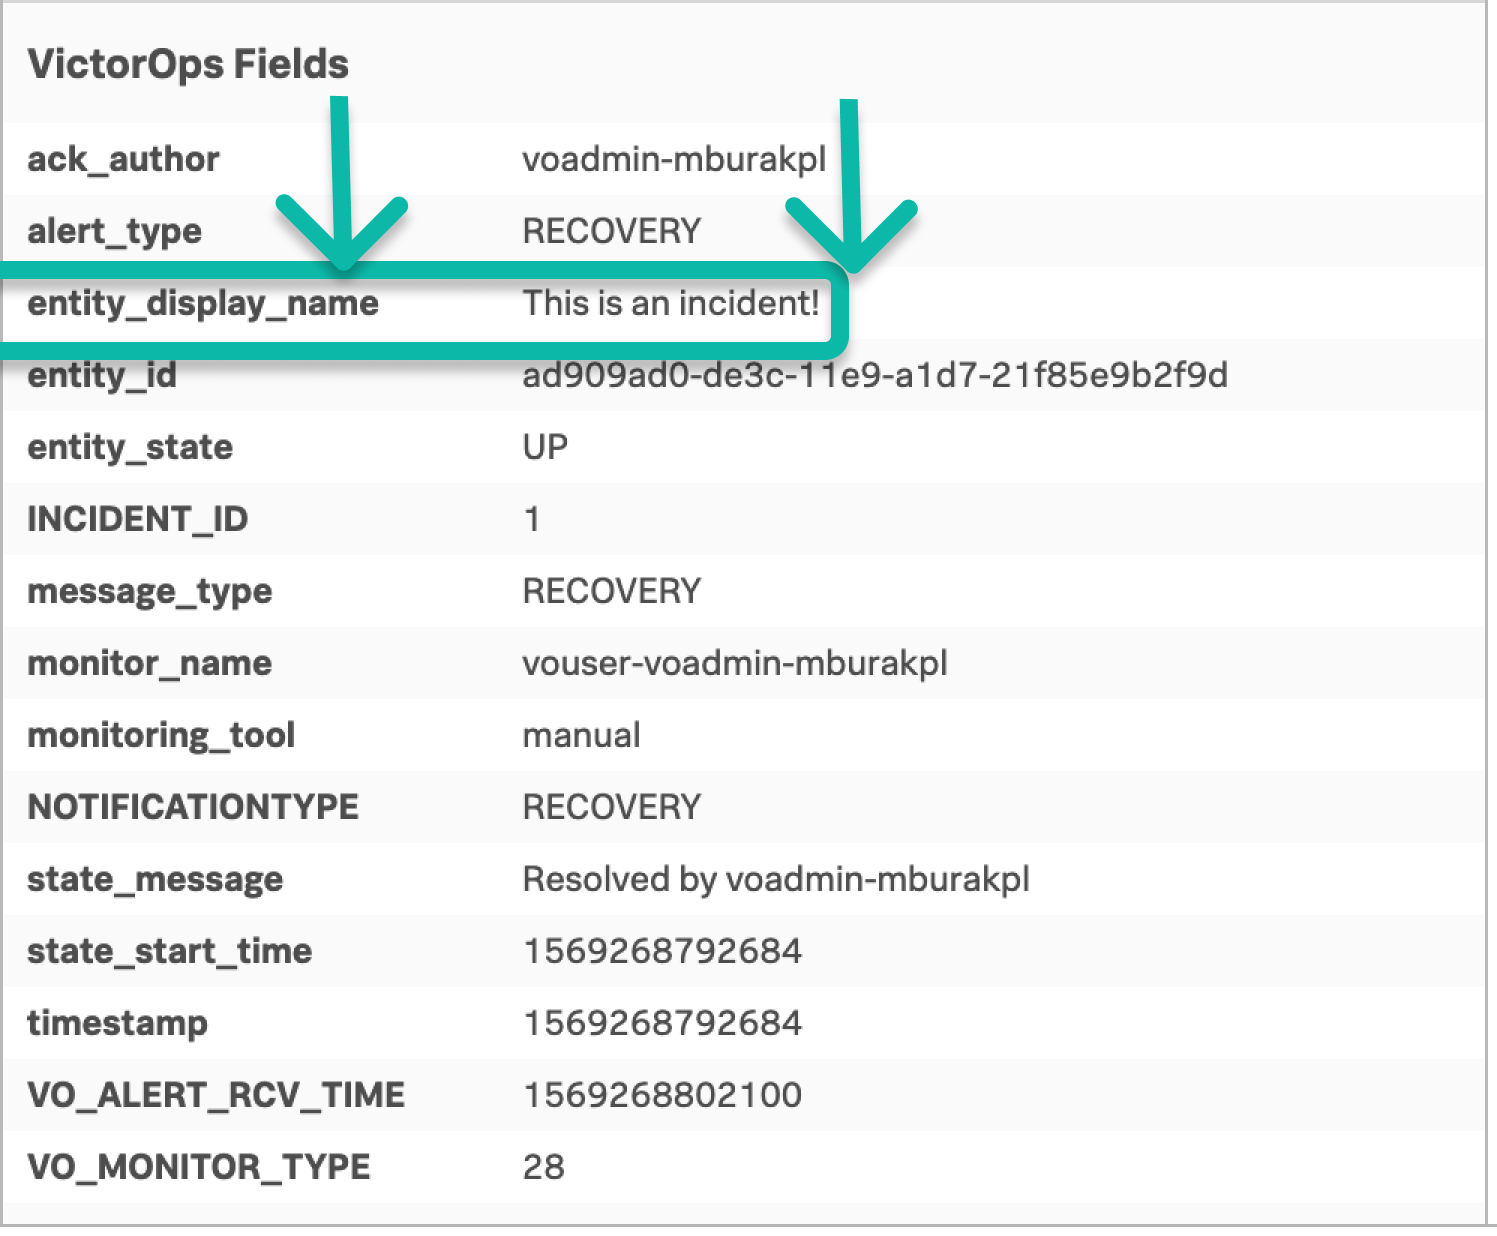 VictorOps fields with field of entity_display name as "This is an incident" highlighted.